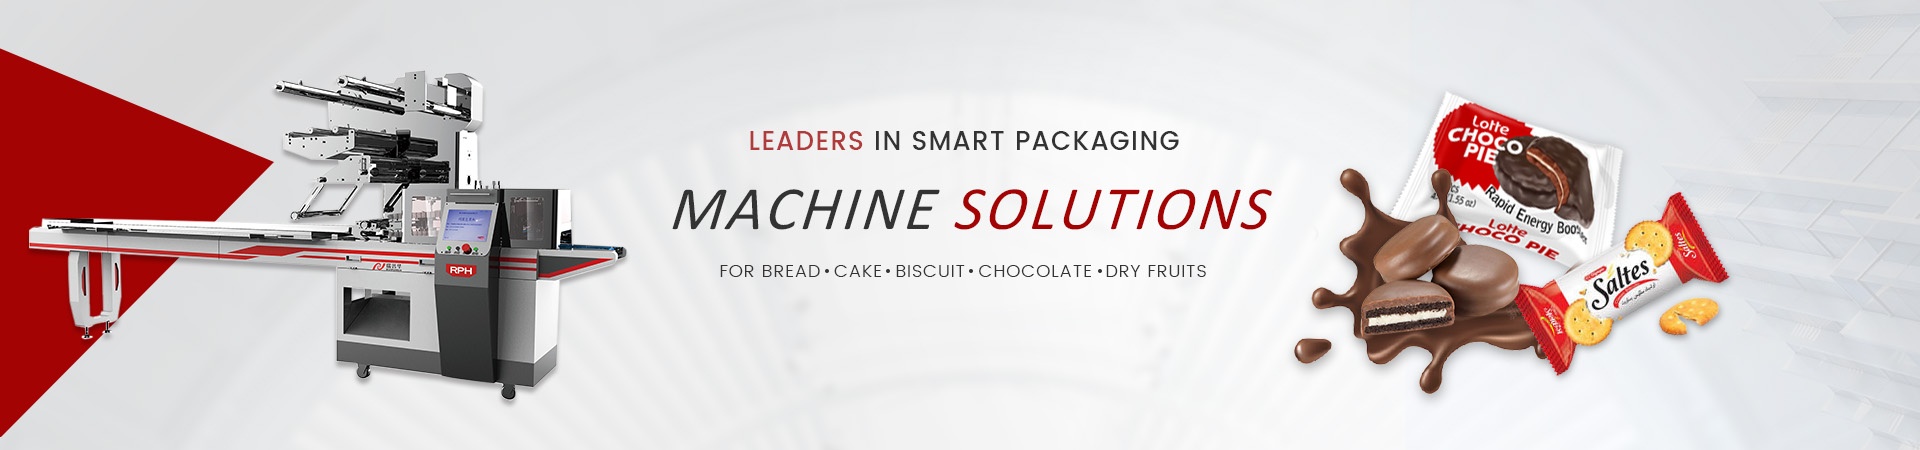 Automatic Packaging Machine Aids Business More Effective